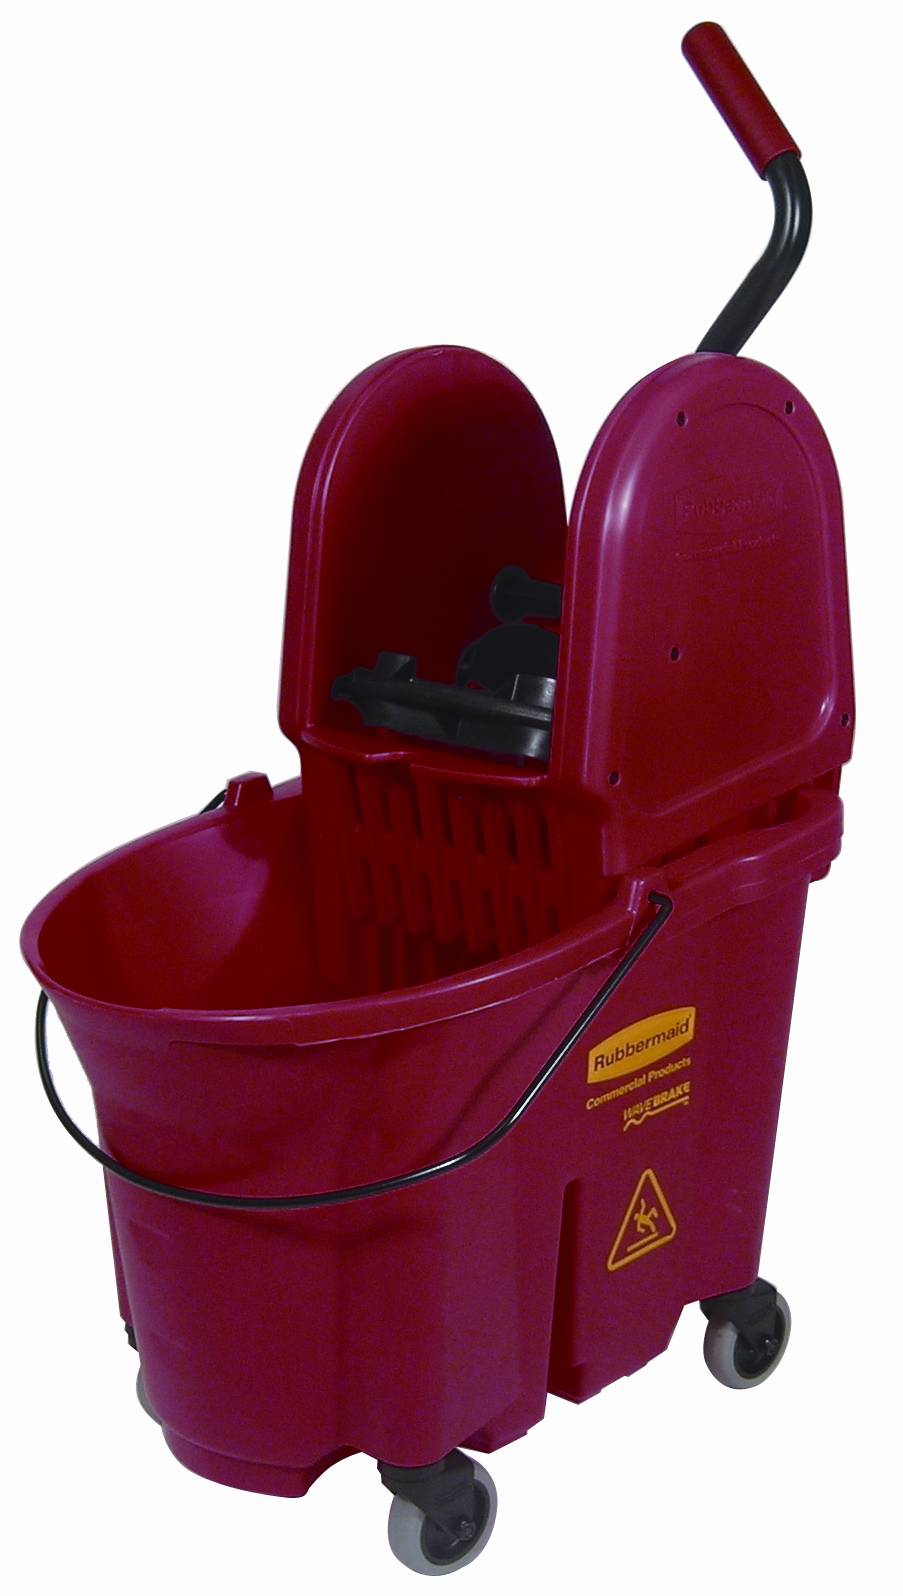 https://www.rubbermaidcommercialproducts.com/wp-images/product/detail/7578-88-Wavebreak.jpg